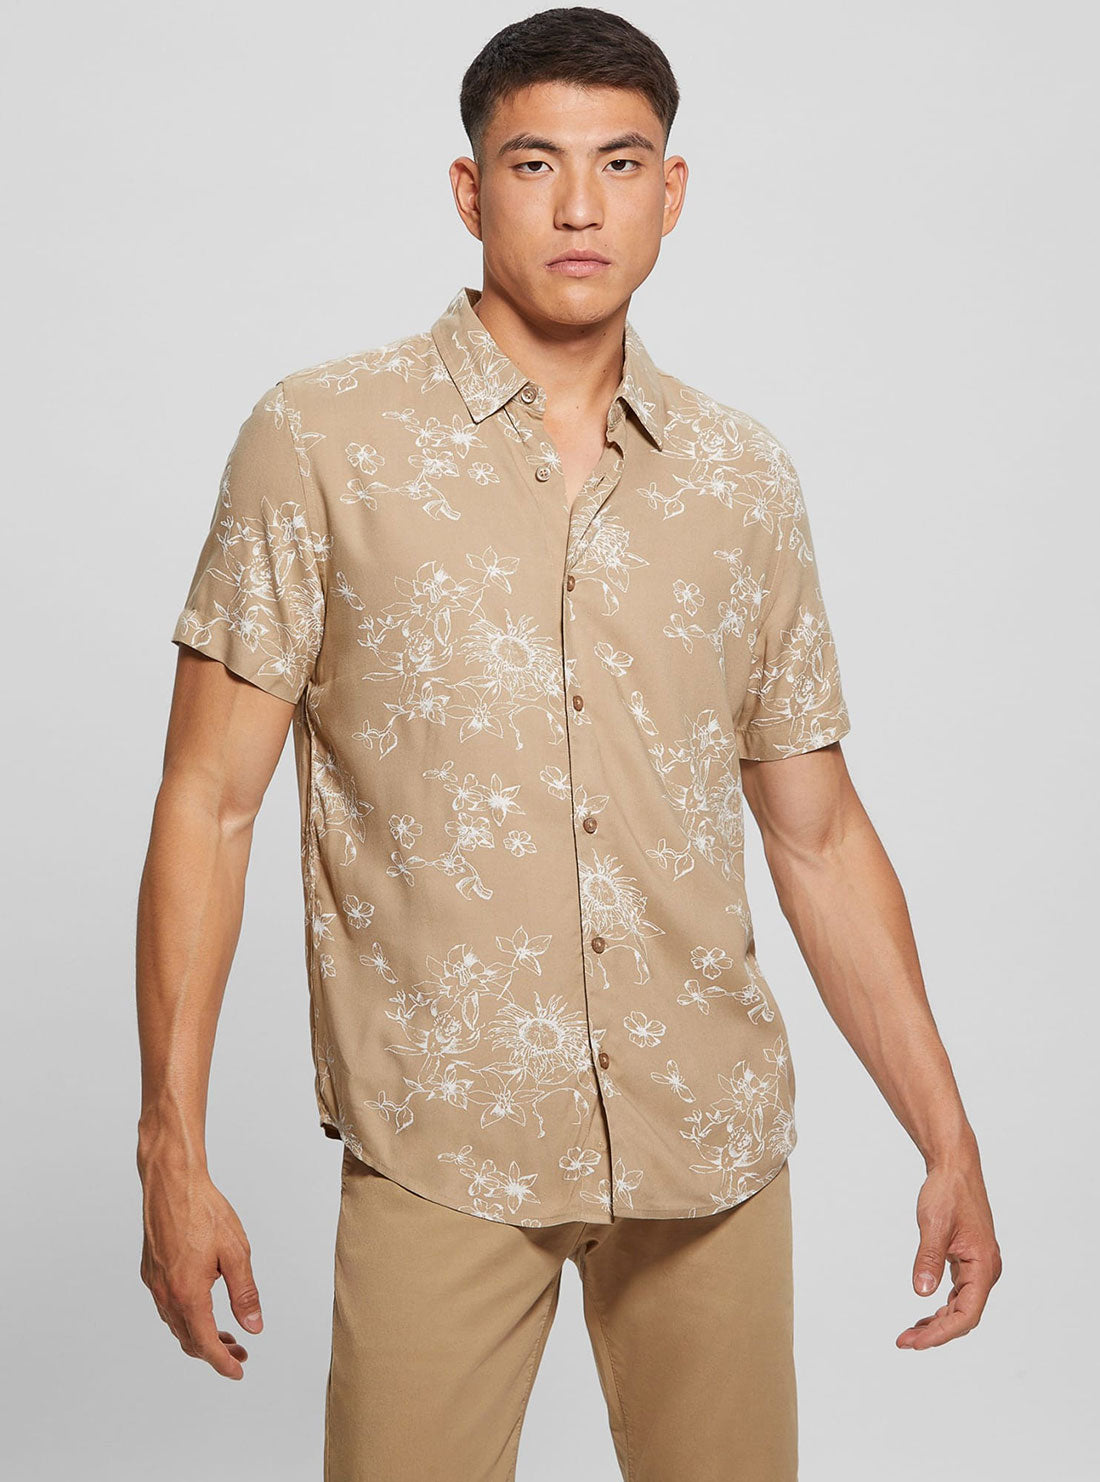 Eco Rayon Sienna Floral Shirt | GUESS Men's | Front view